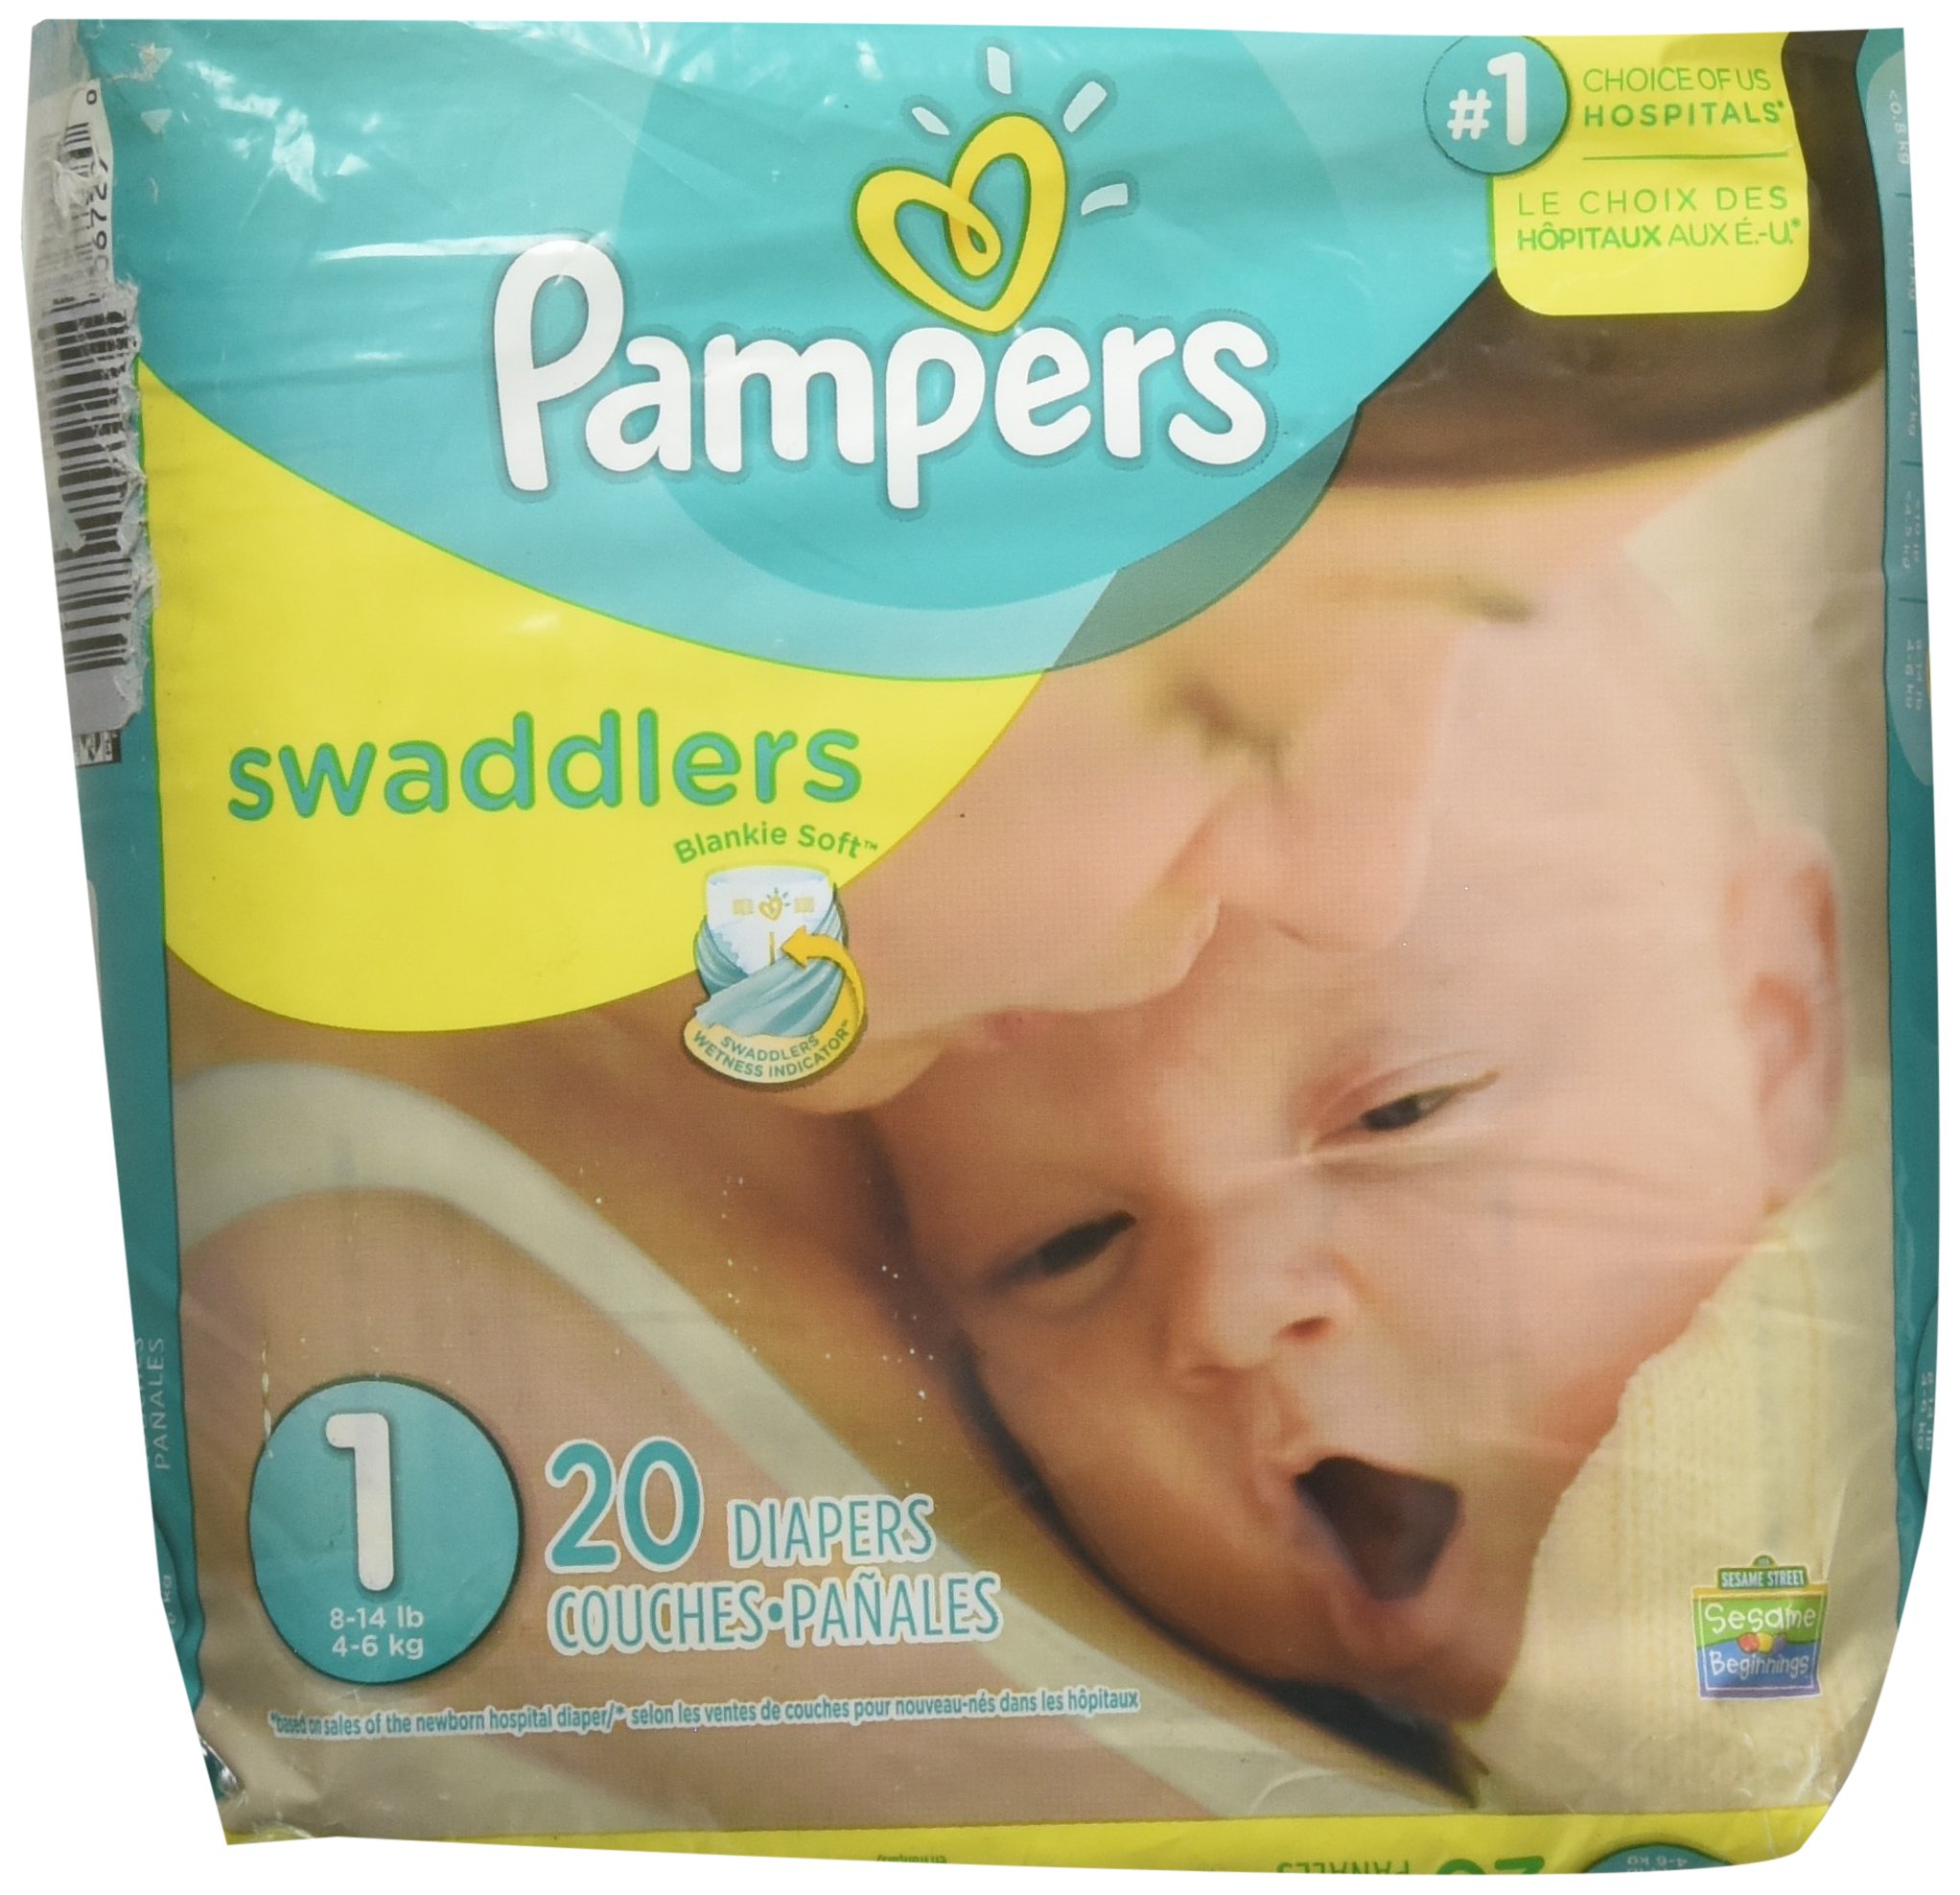 pampery pampers